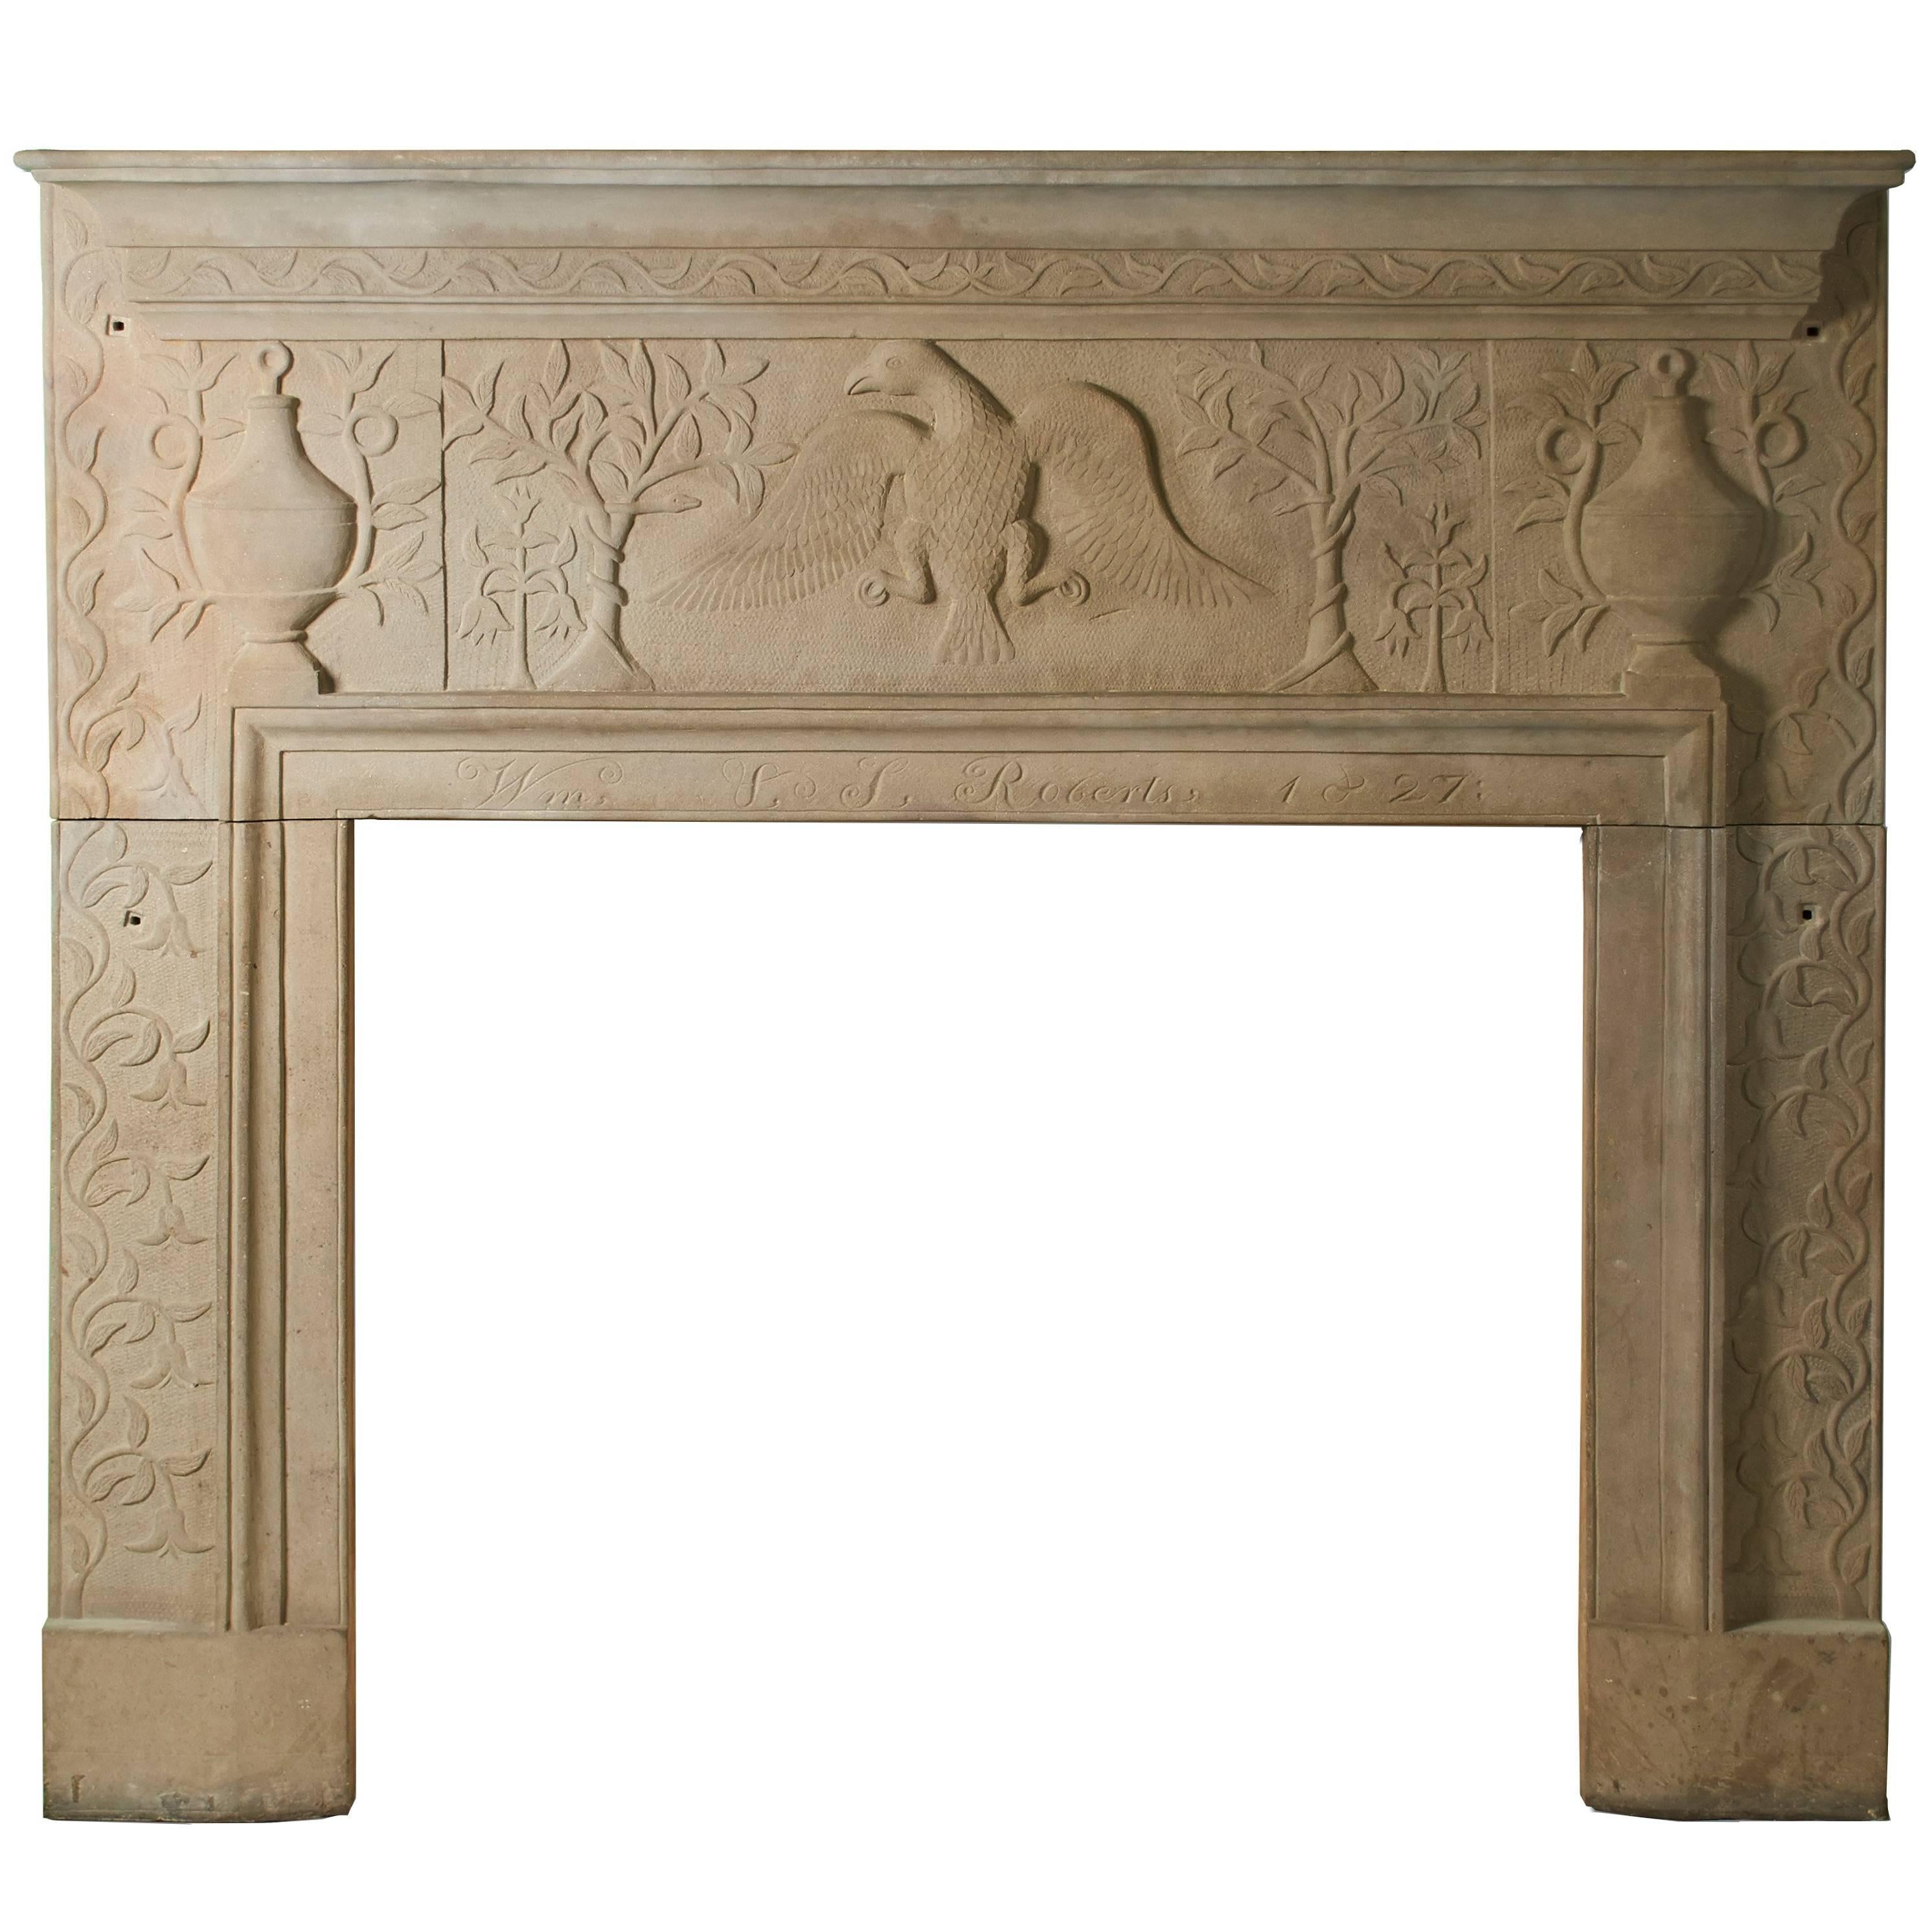 Carved Sandstone Mantel from Ohio, Dated 1827 For Sale